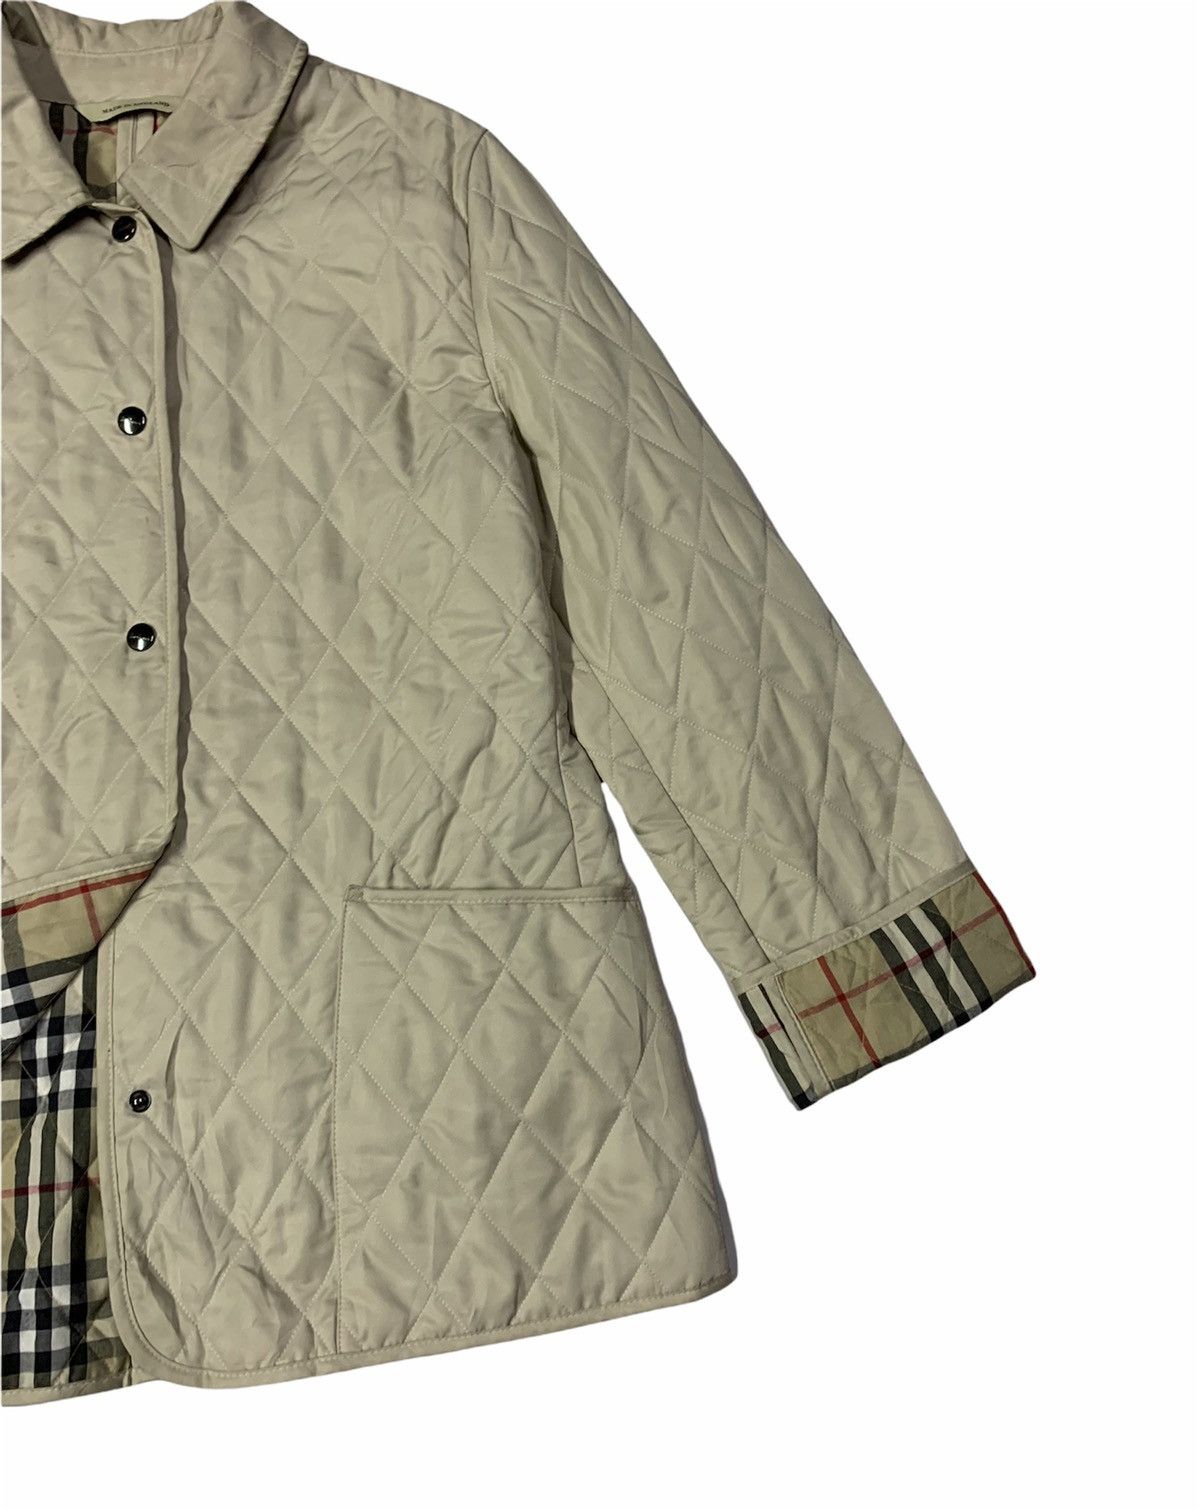 🔥BURBERRY QUILTED JACKETS NOVACHECK - 5